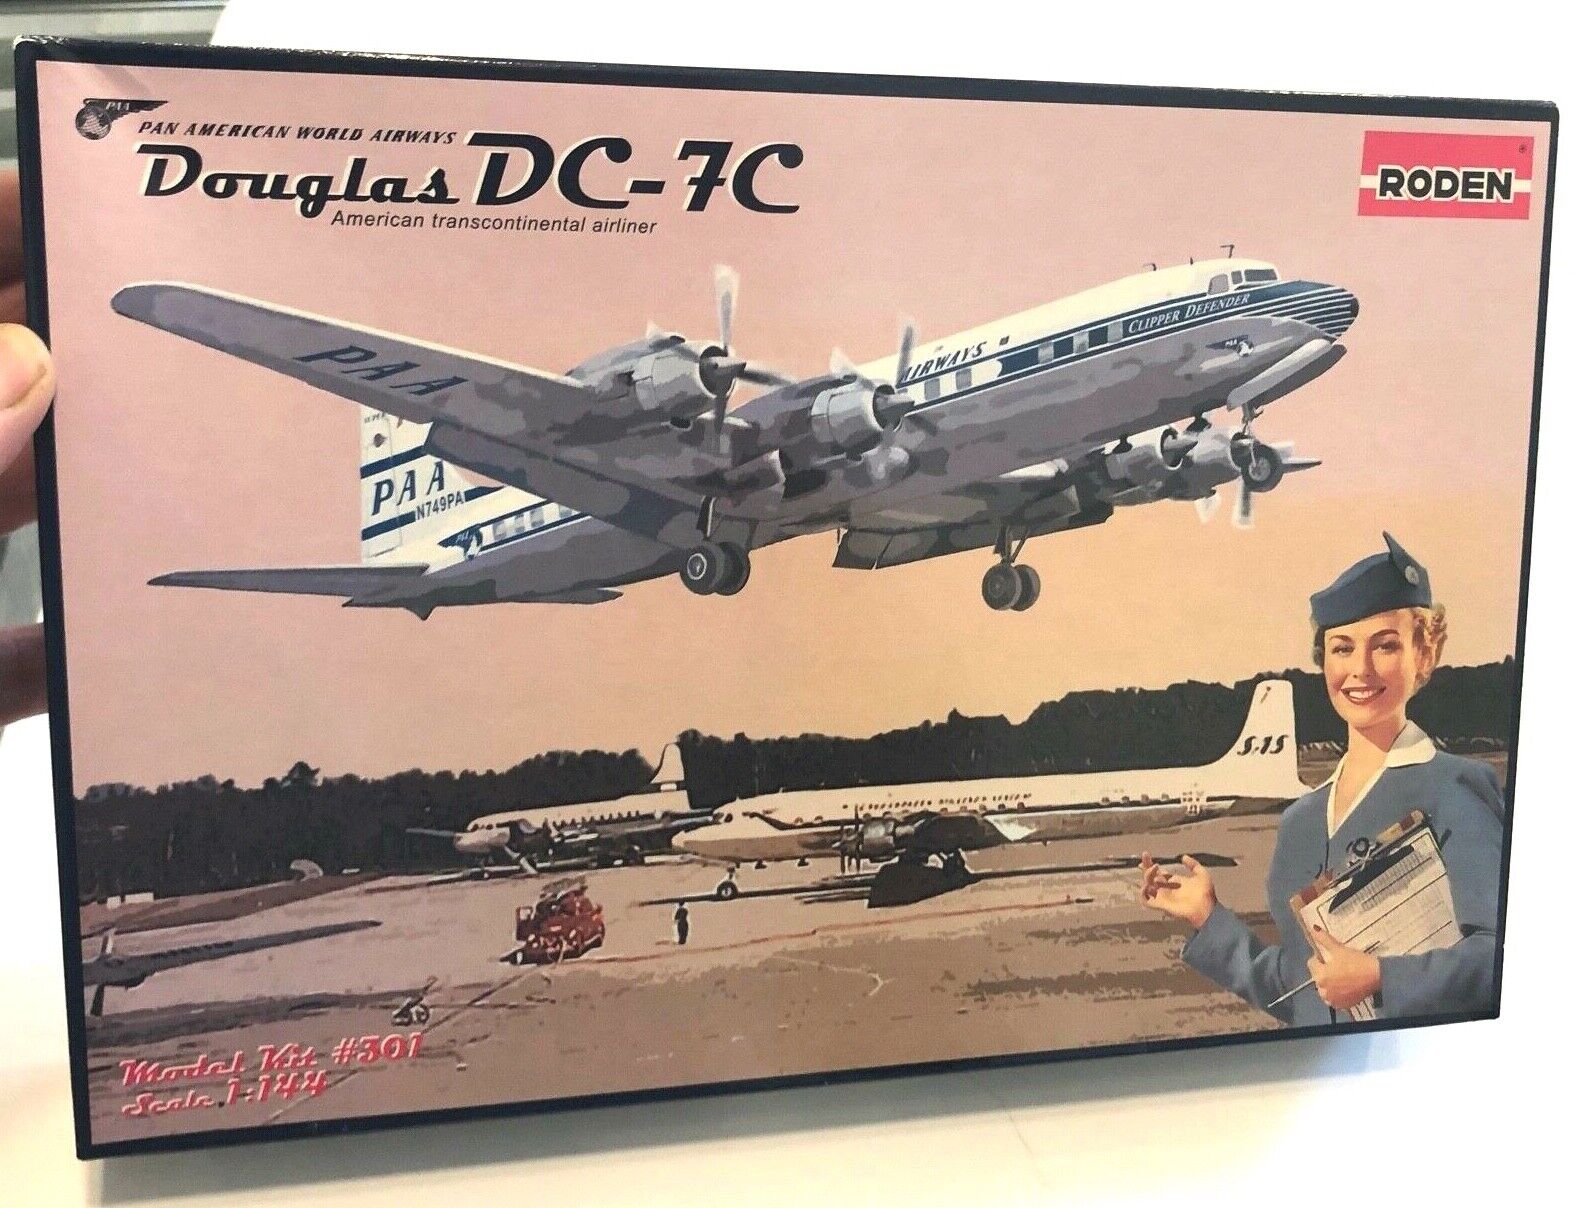 RODEN, Pan American Airlines Douglas DC-7C, 1:144, Unassembled in the box, New.